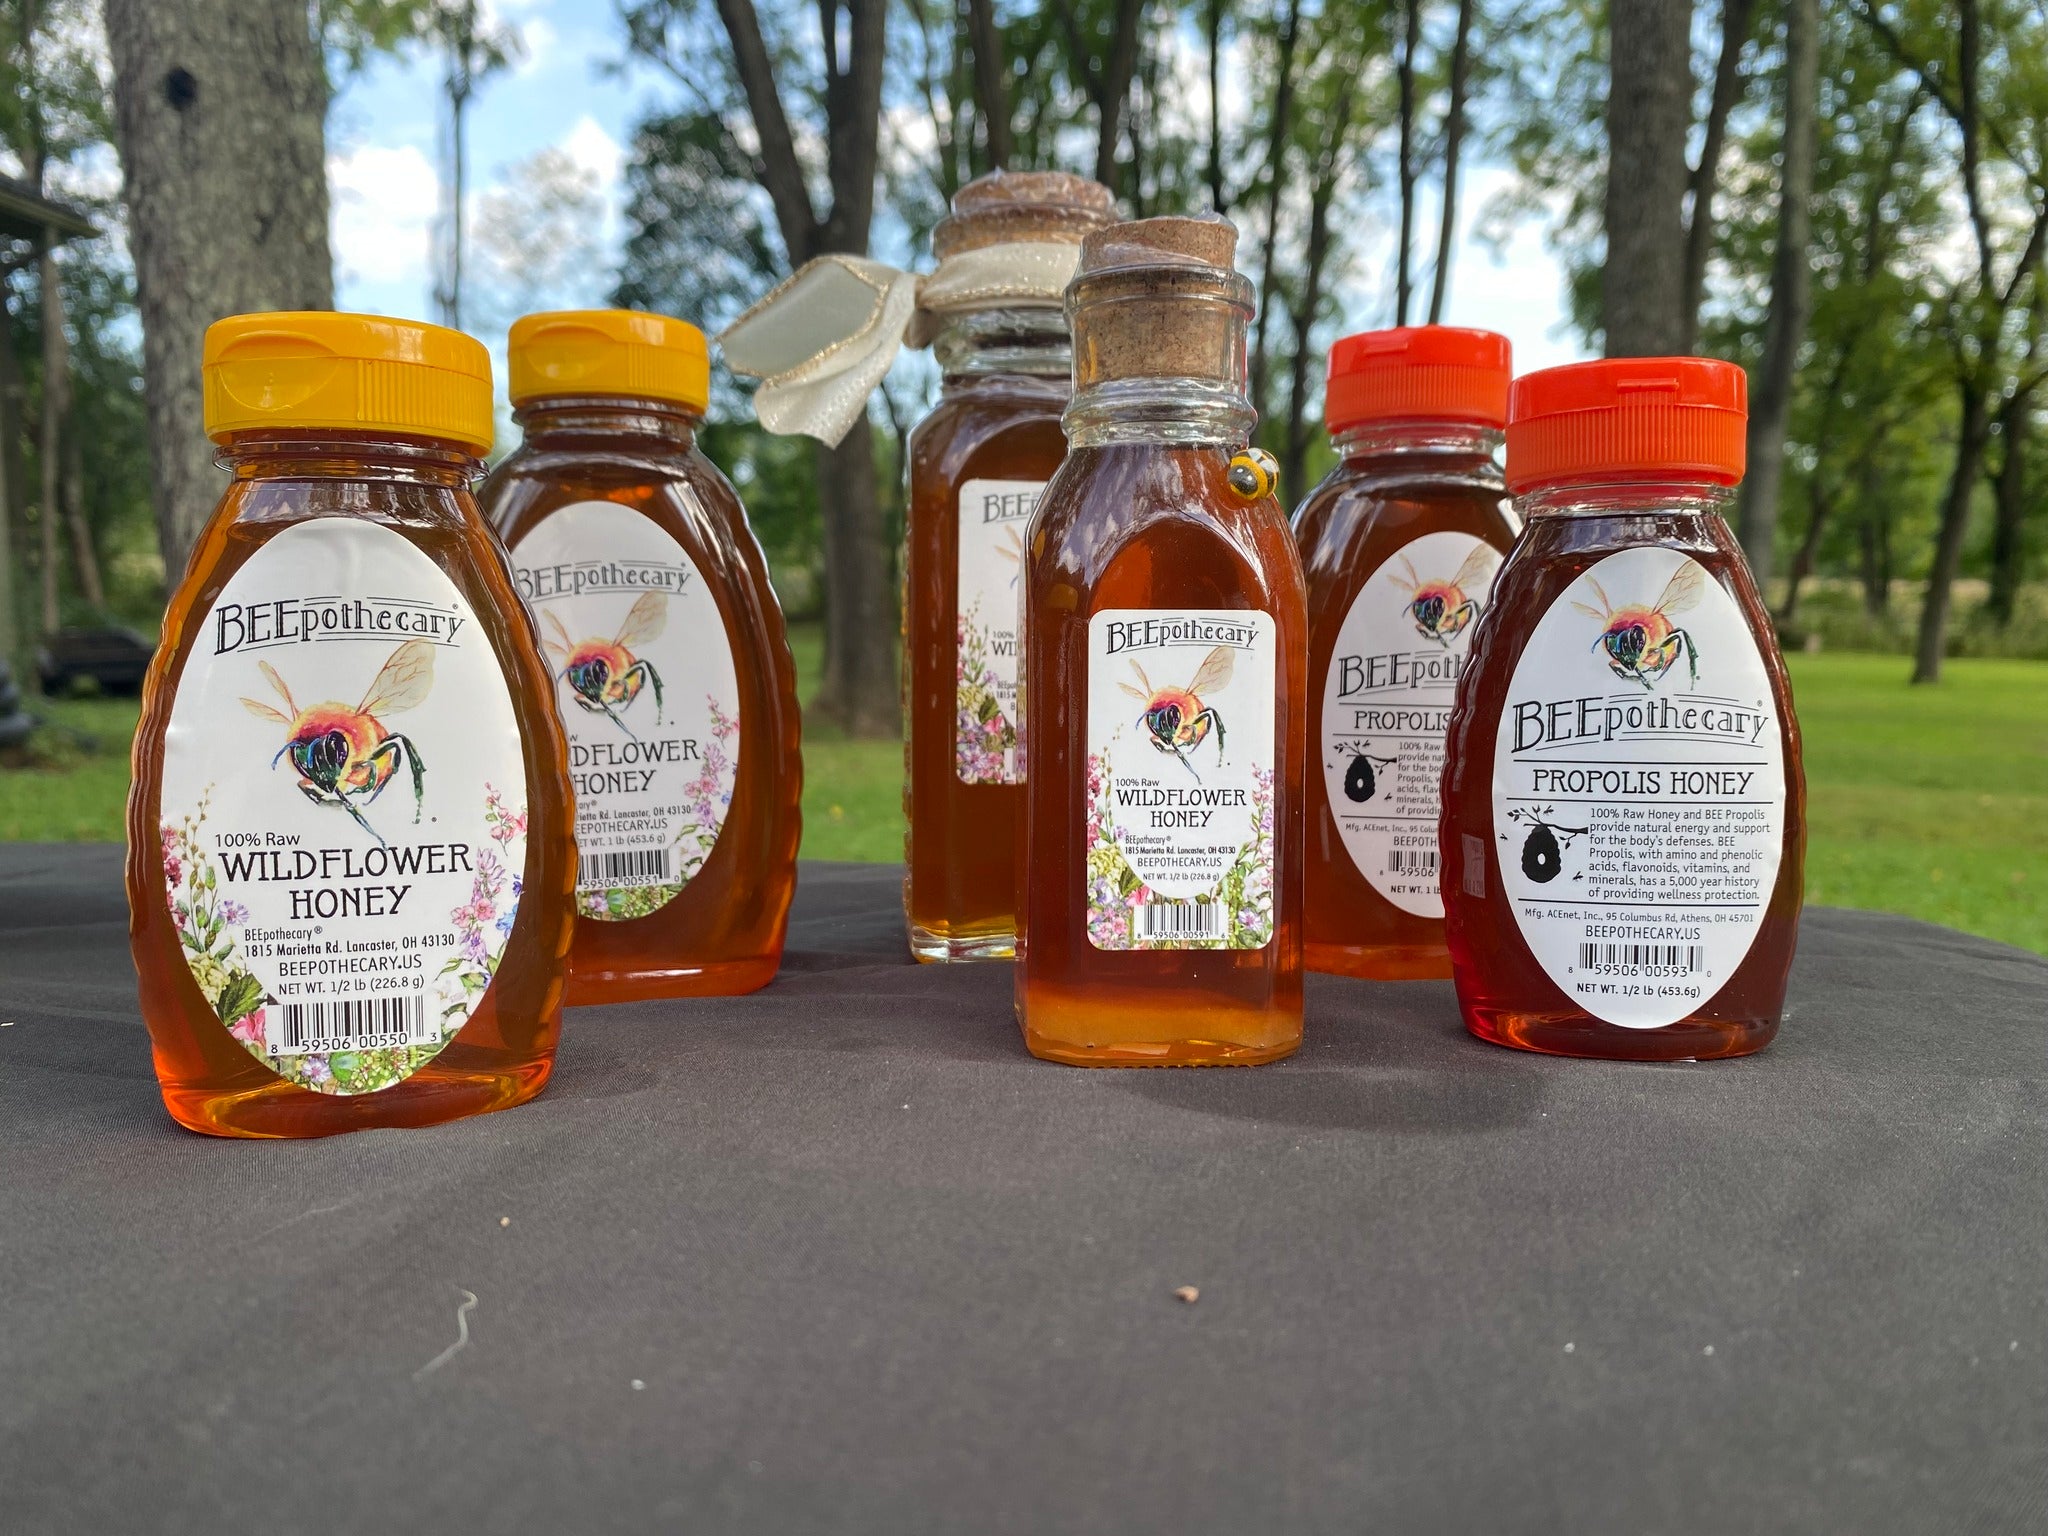 BEEpothecary honey products on a table outside. Honey is golden orange color.